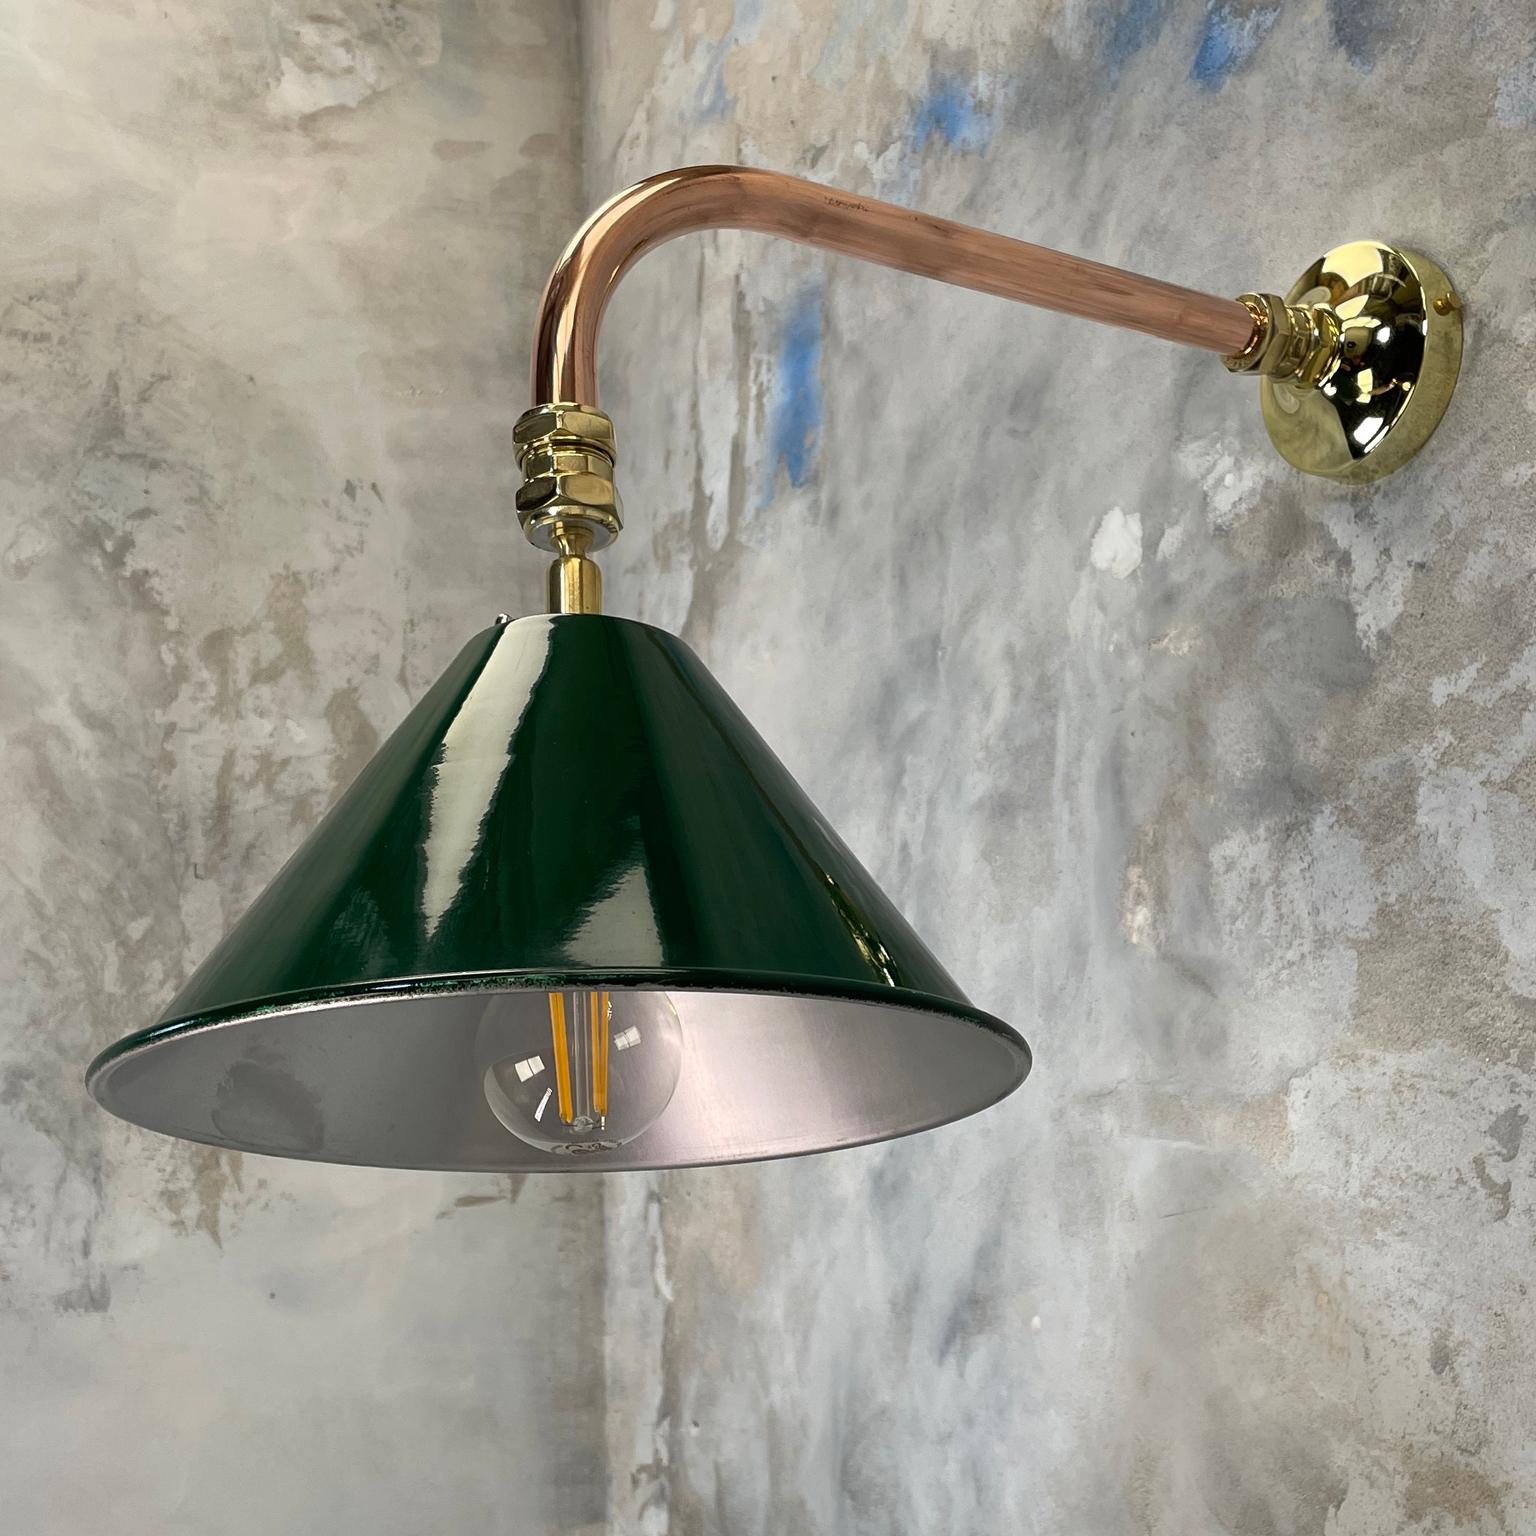 Aluminum 1980's Copper & Brass Cantilever Lamp Green British Army Lamp Shade For Sale